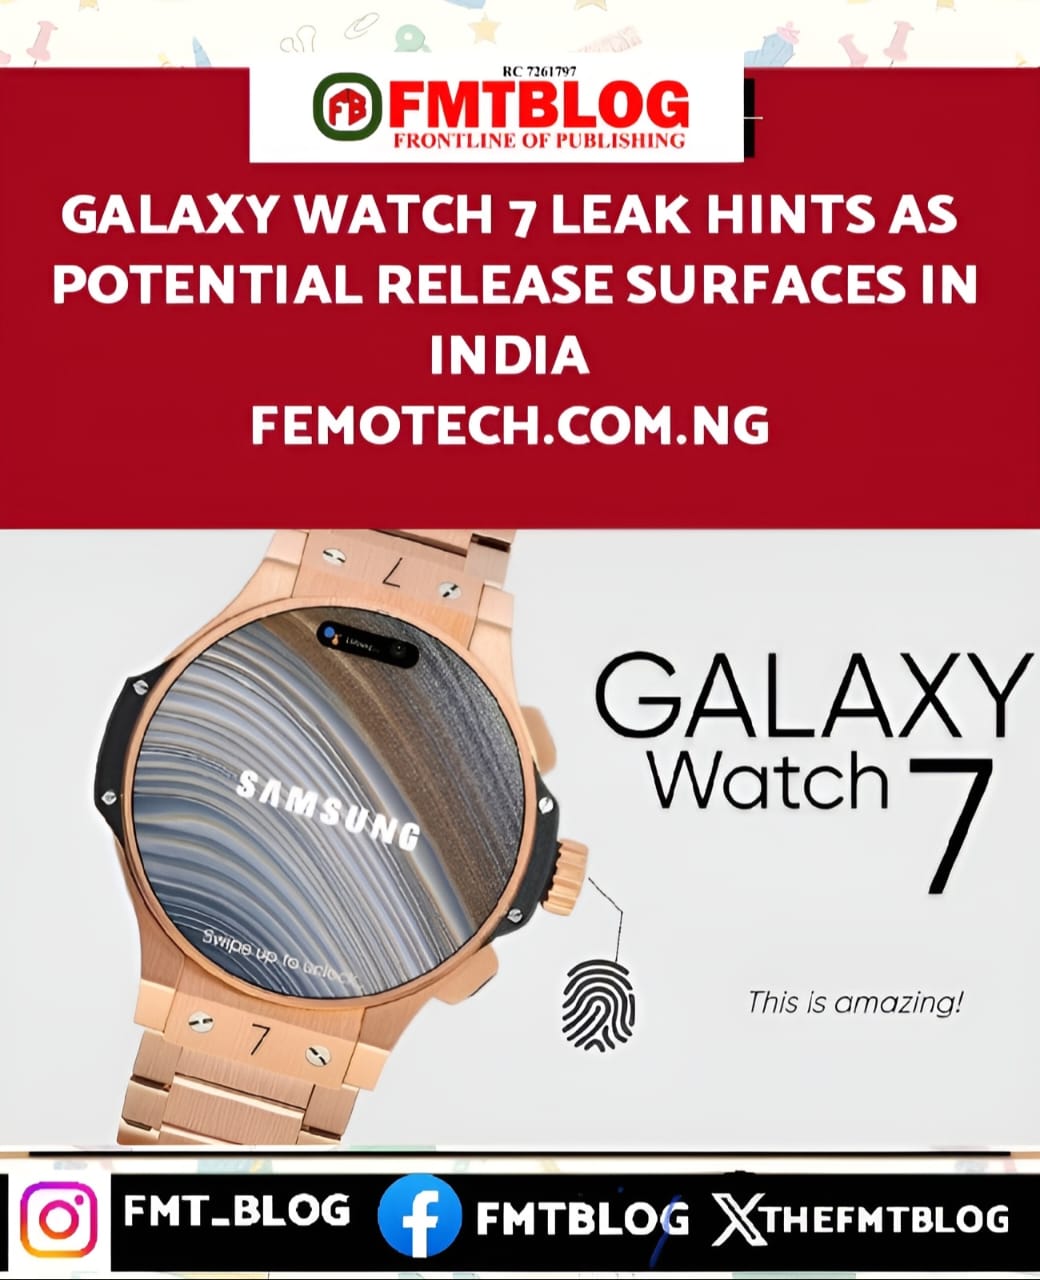 Galaxy Watch 7 Leak Hints As Potential Release Surfaces In India